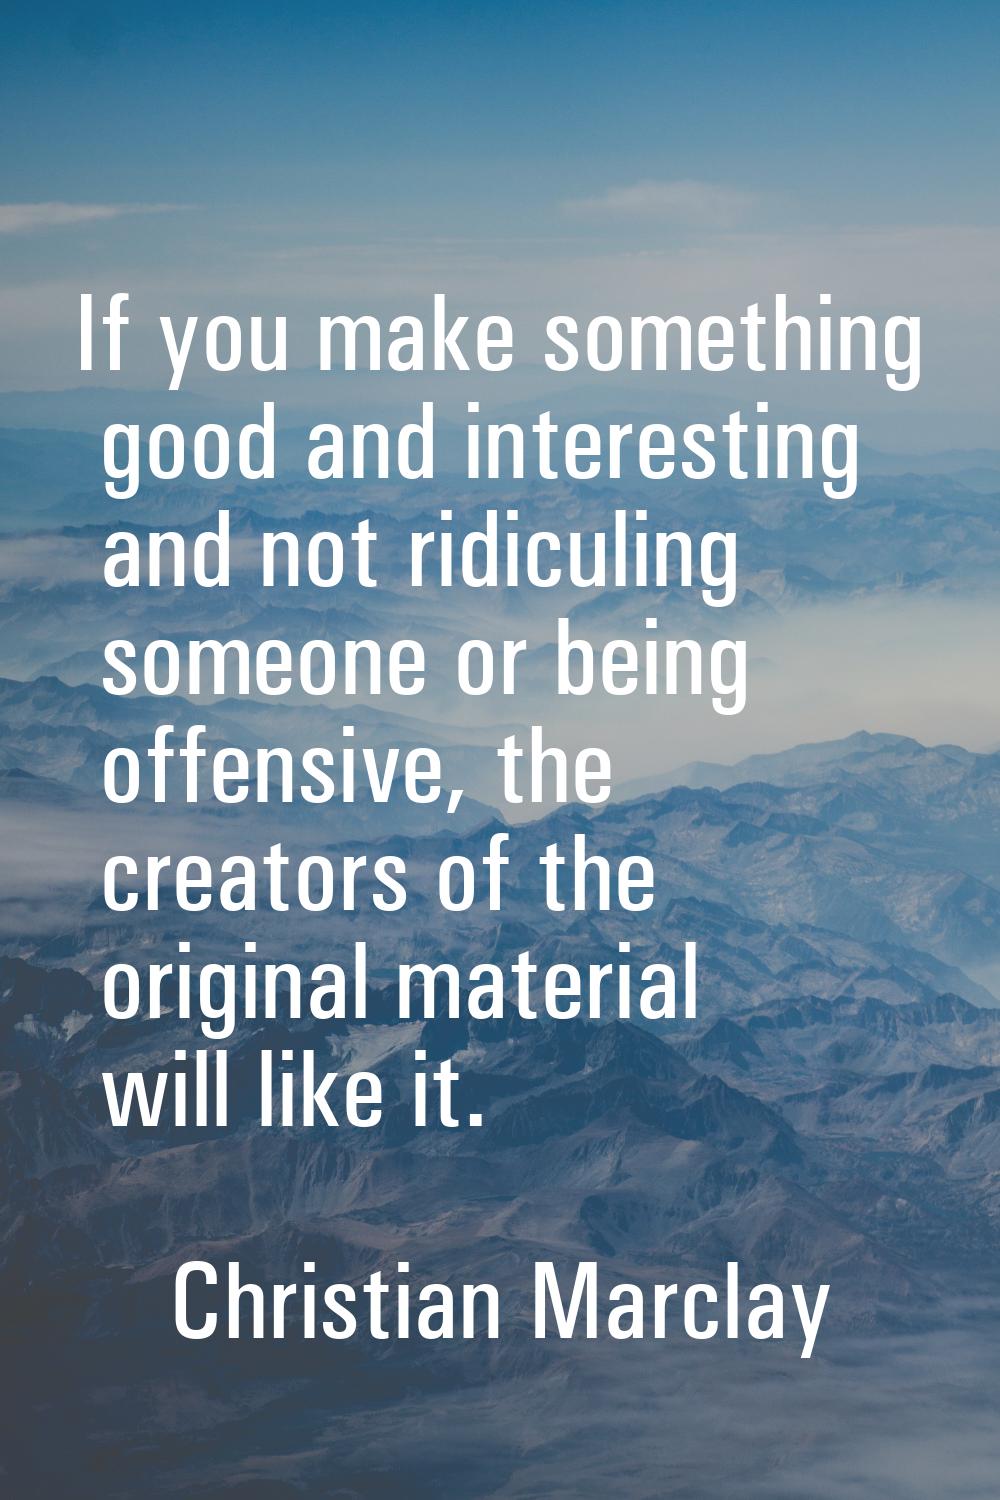 If you make something good and interesting and not ridiculing someone or being offensive, the creat